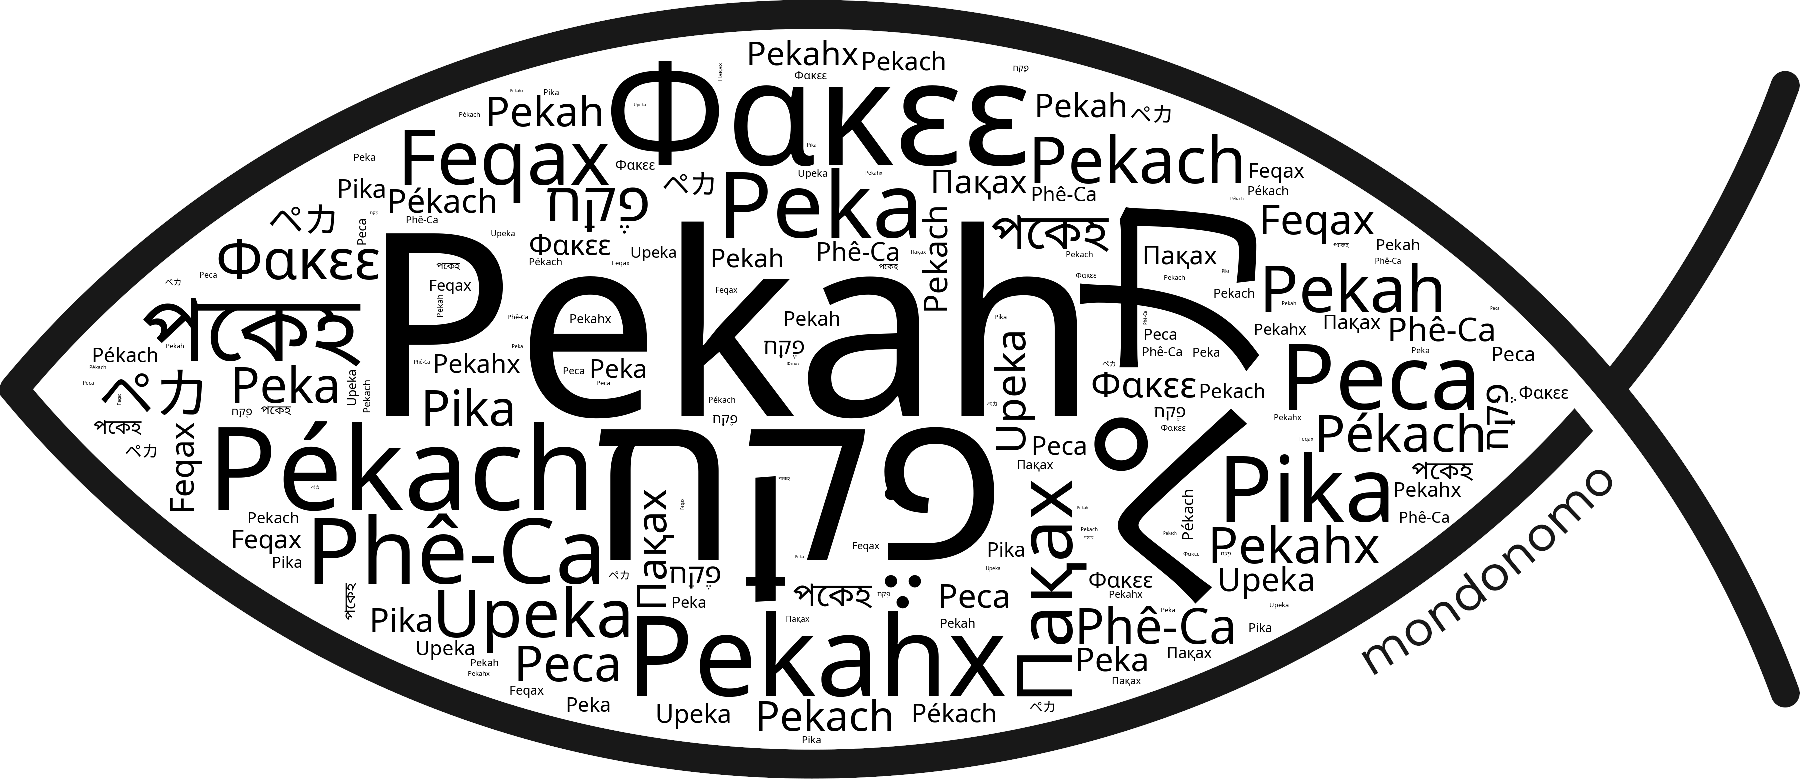 Name Pekah in the world's Bibles